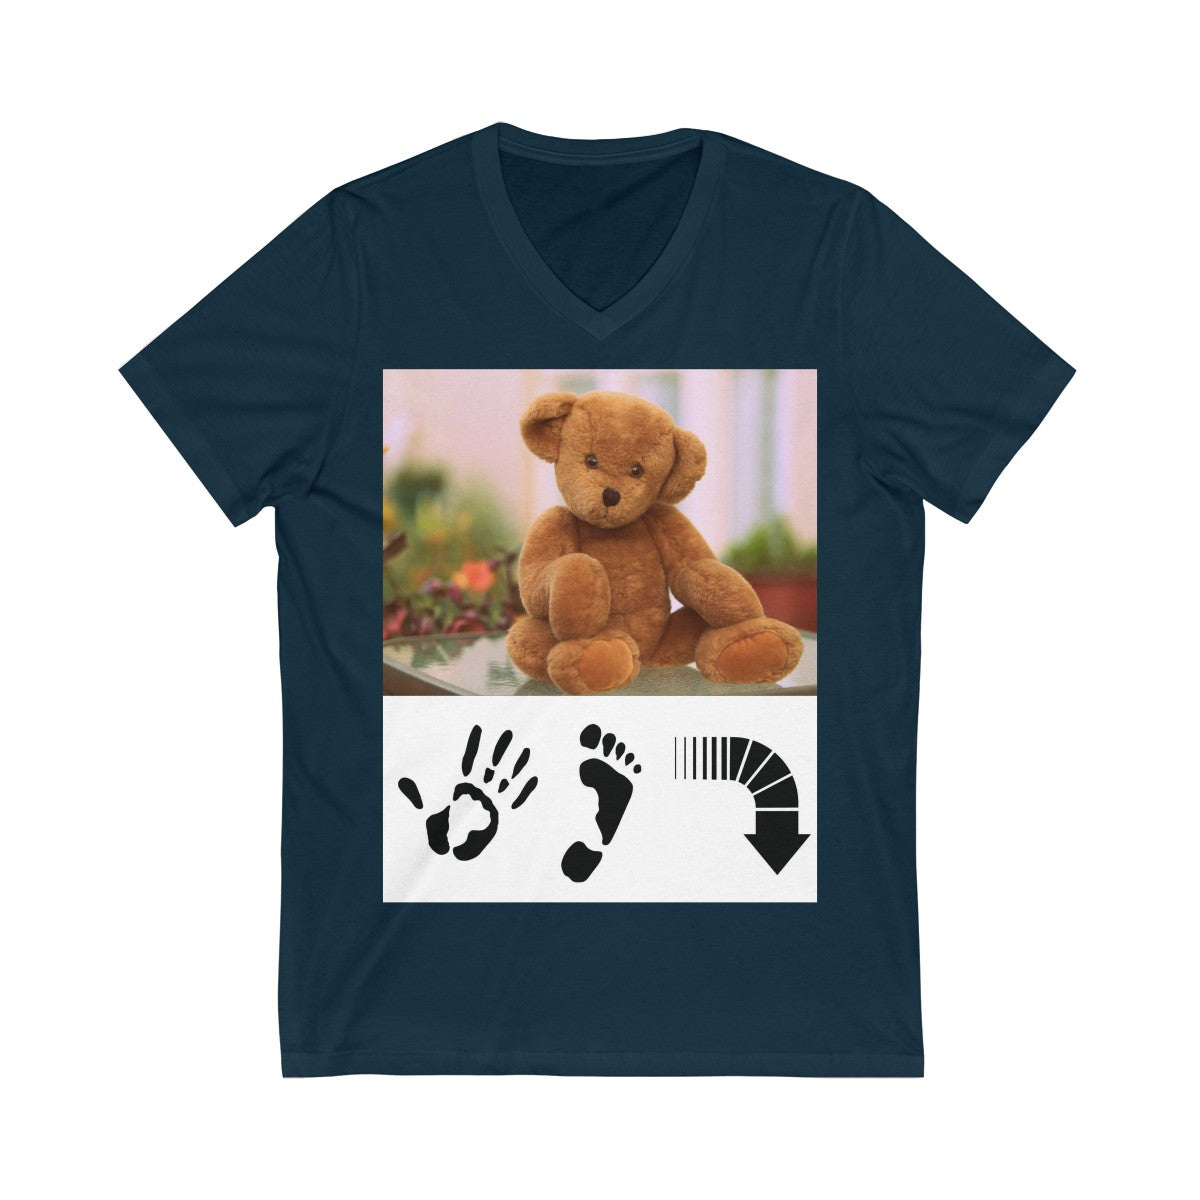 Five Toes Down Teddy Unisex V-Neck Tee